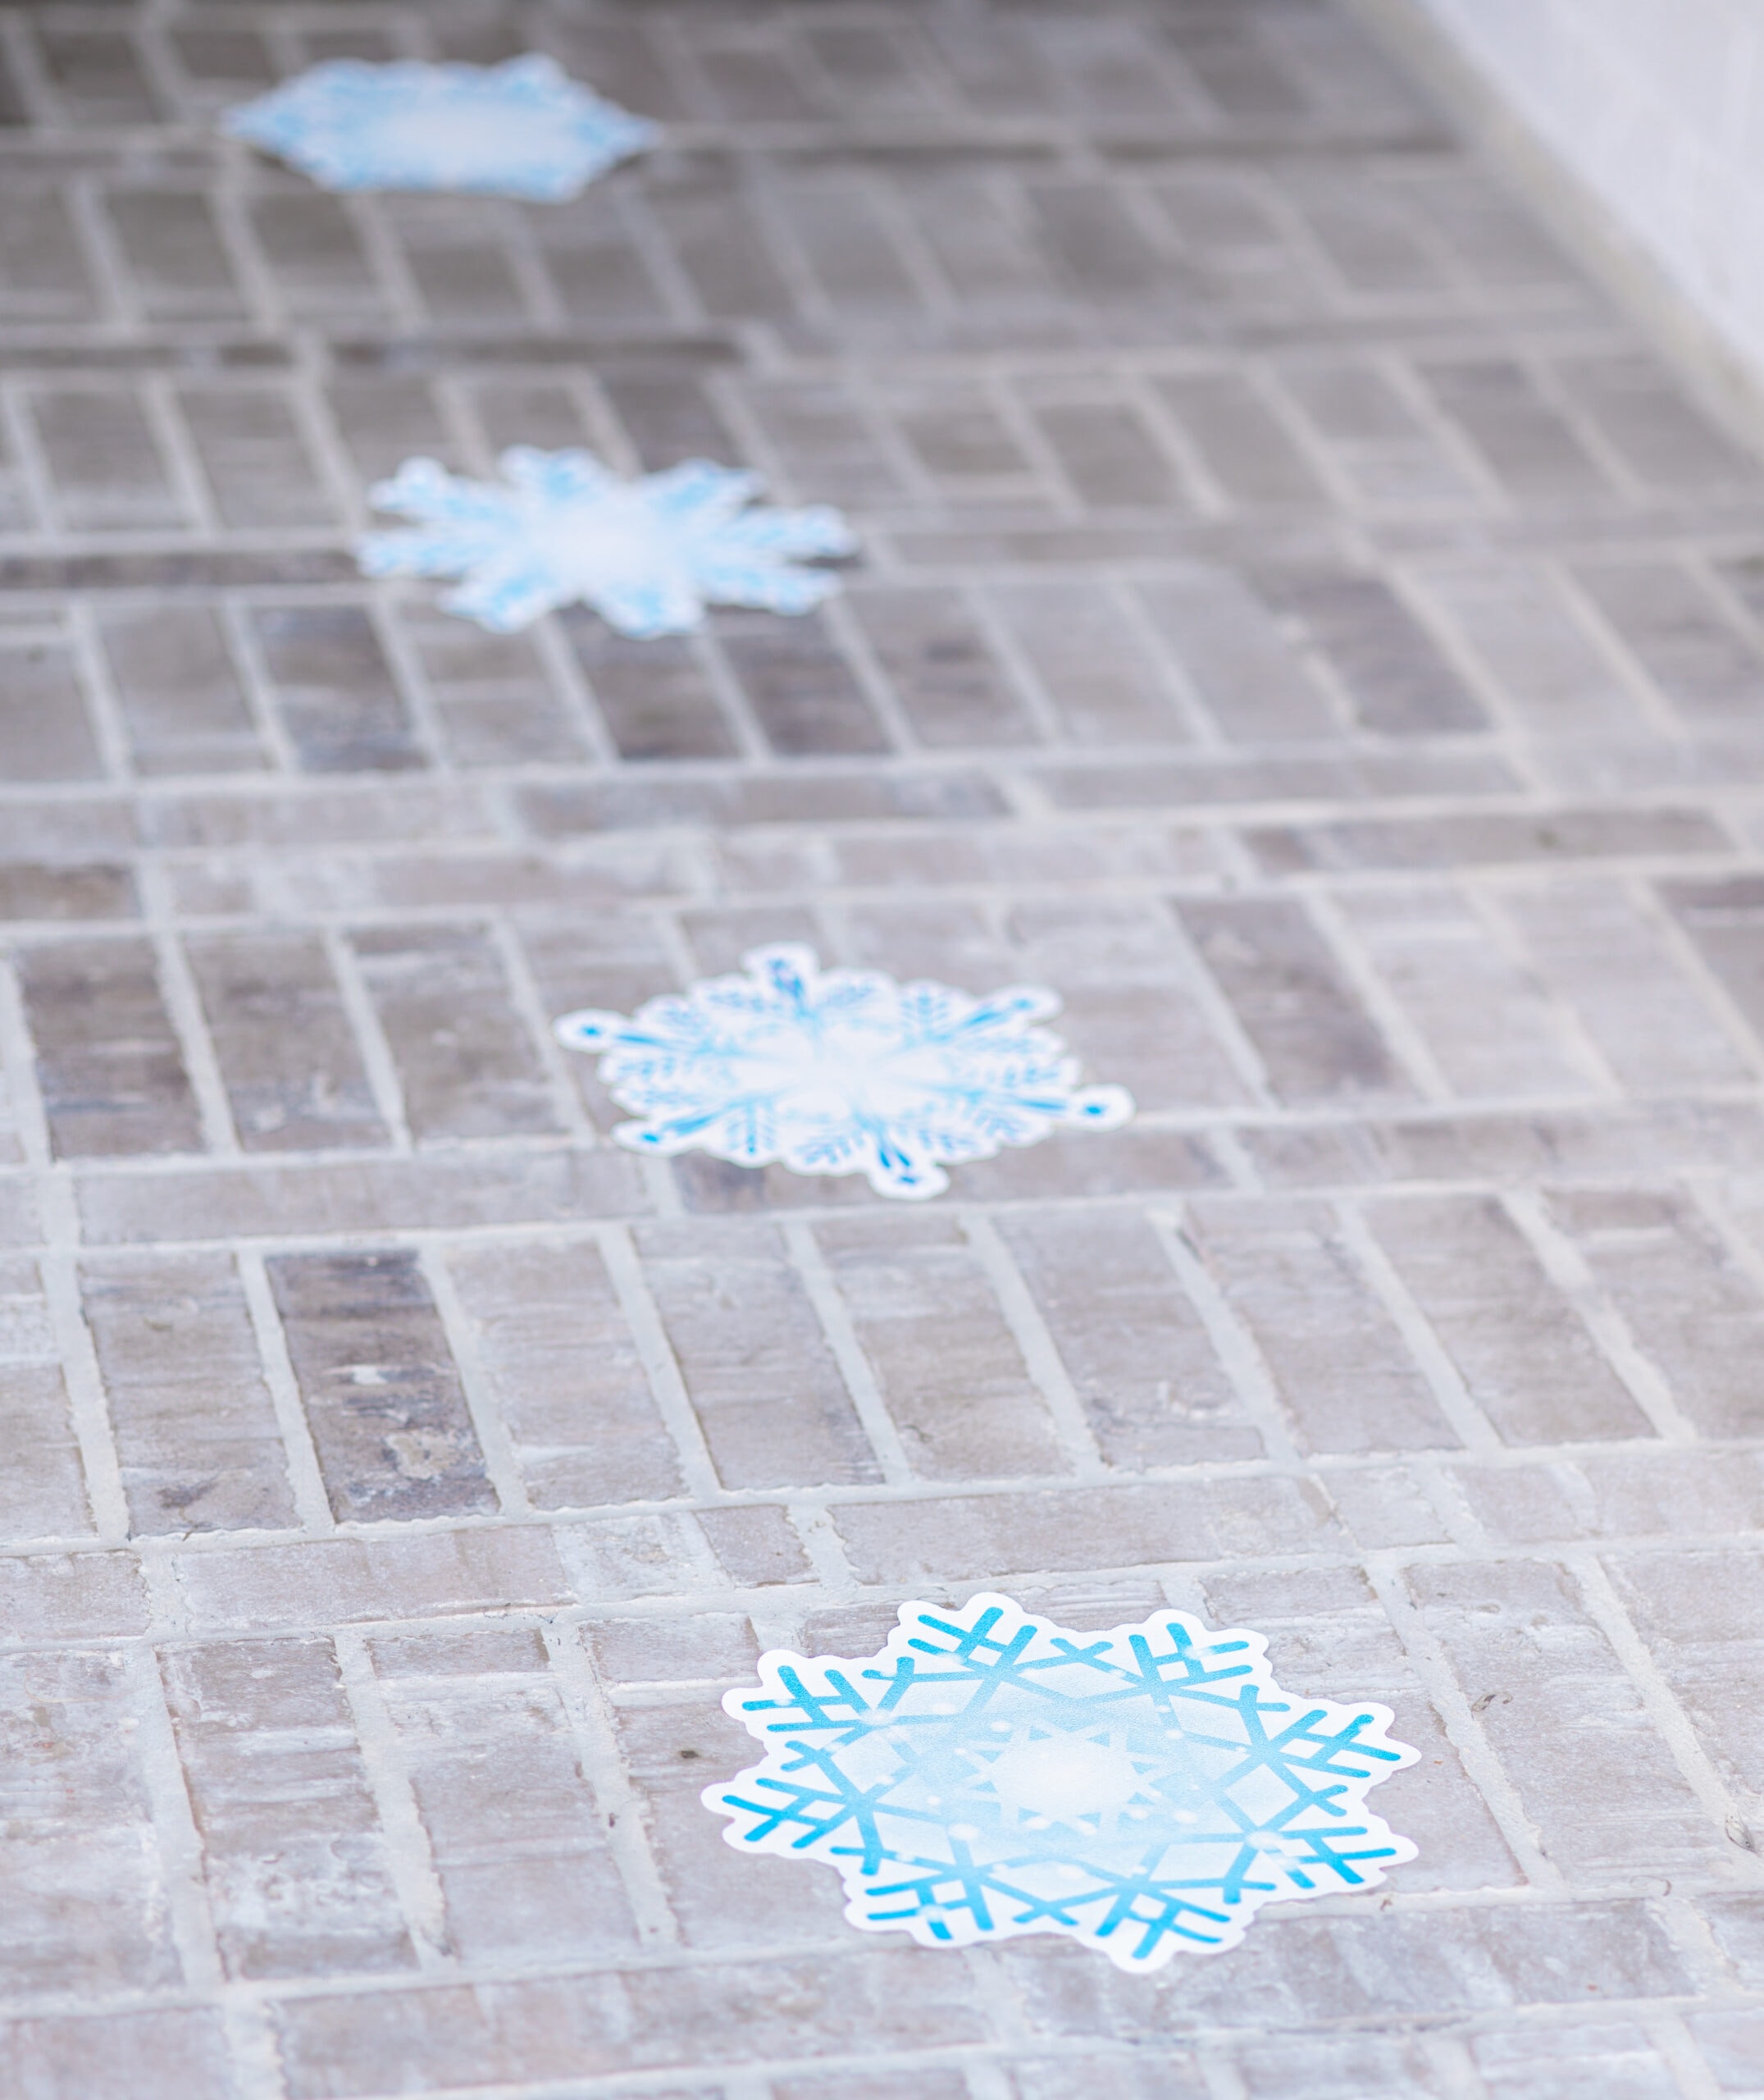 Snowflake decals on the floor